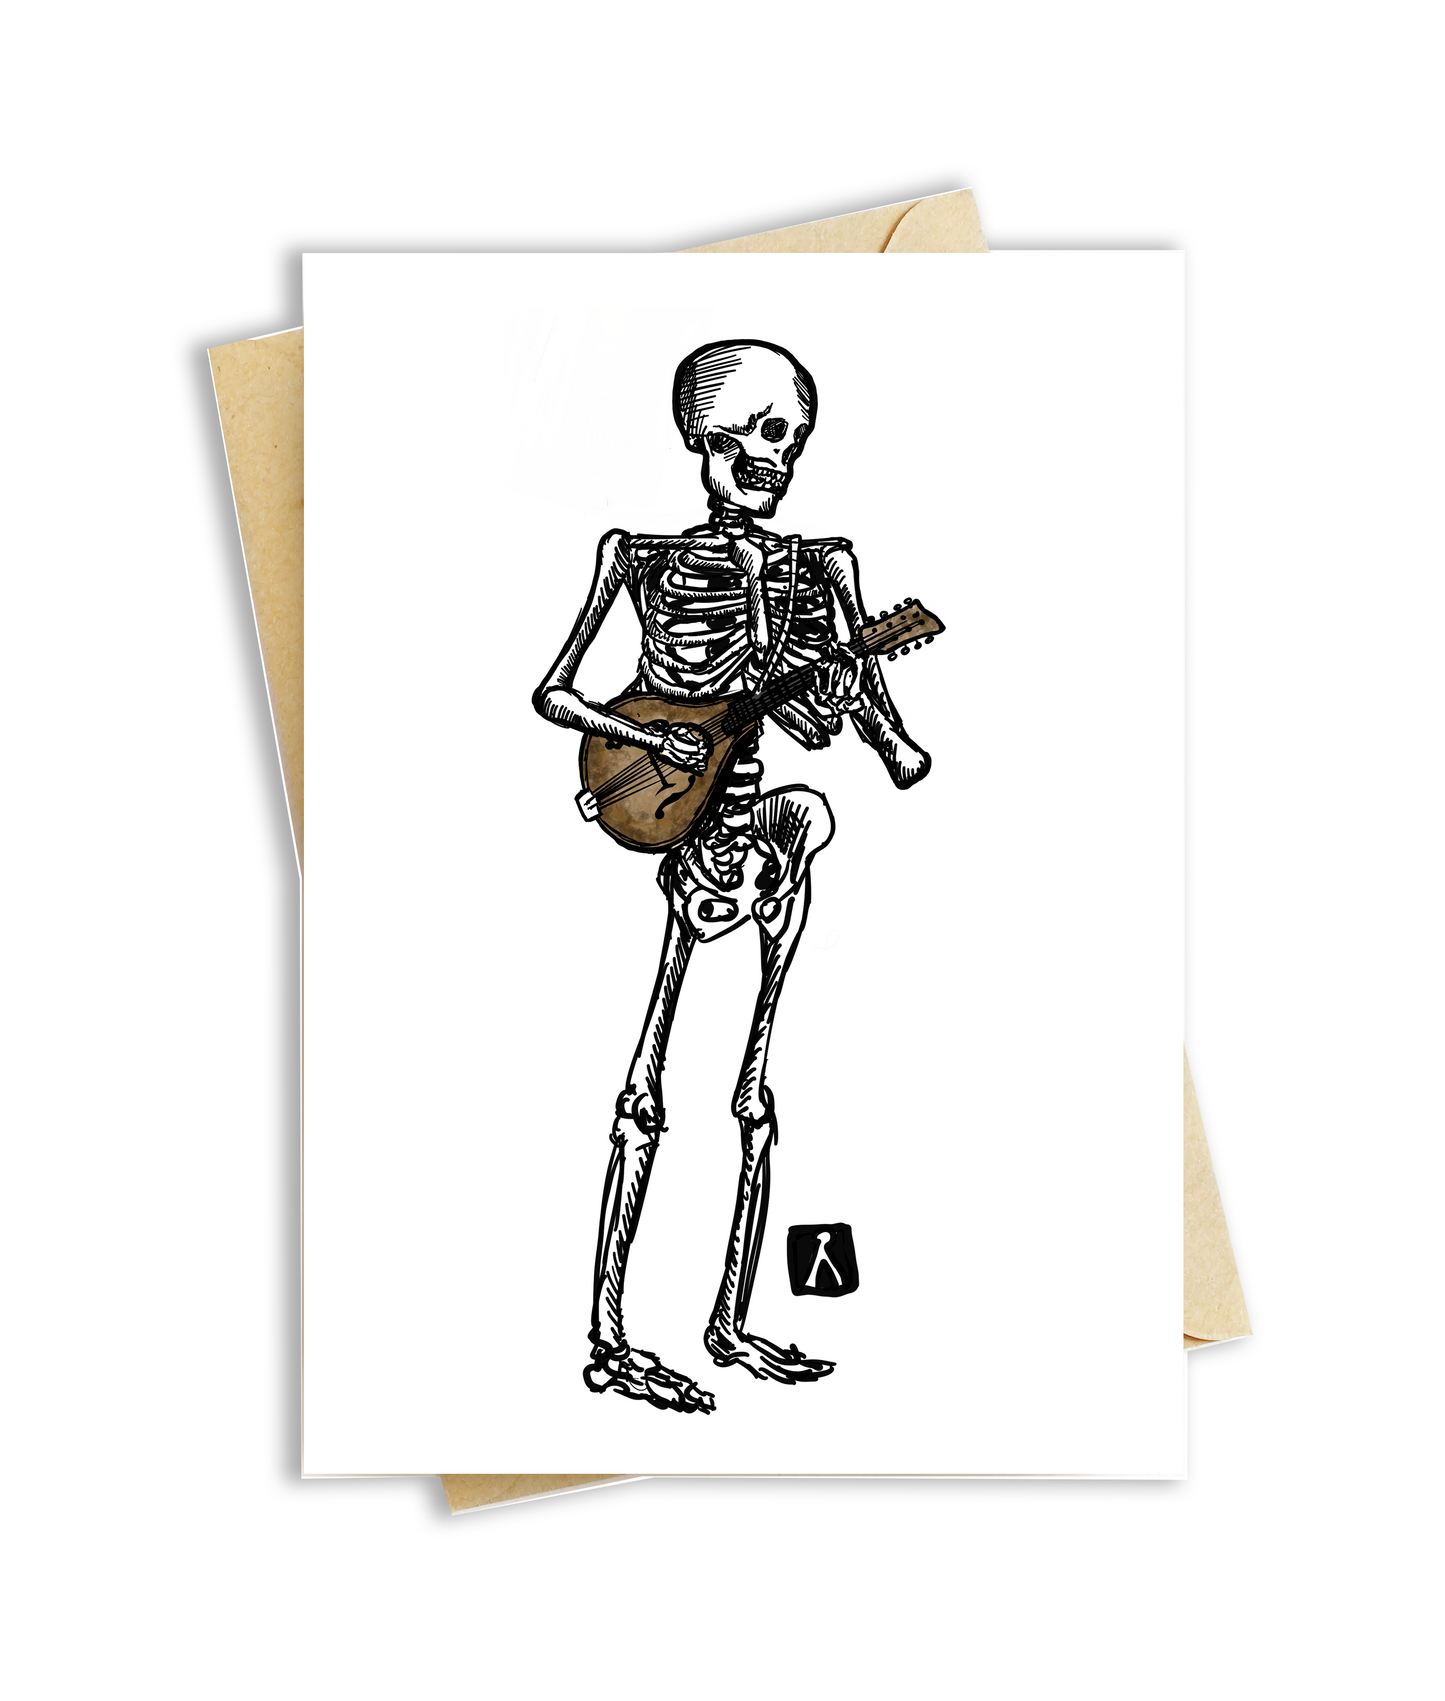 BellavanceInk: Greeting Card With Skeletons Playing The Banjo, Mandolin, Or Guitar 5 x 7 Inches